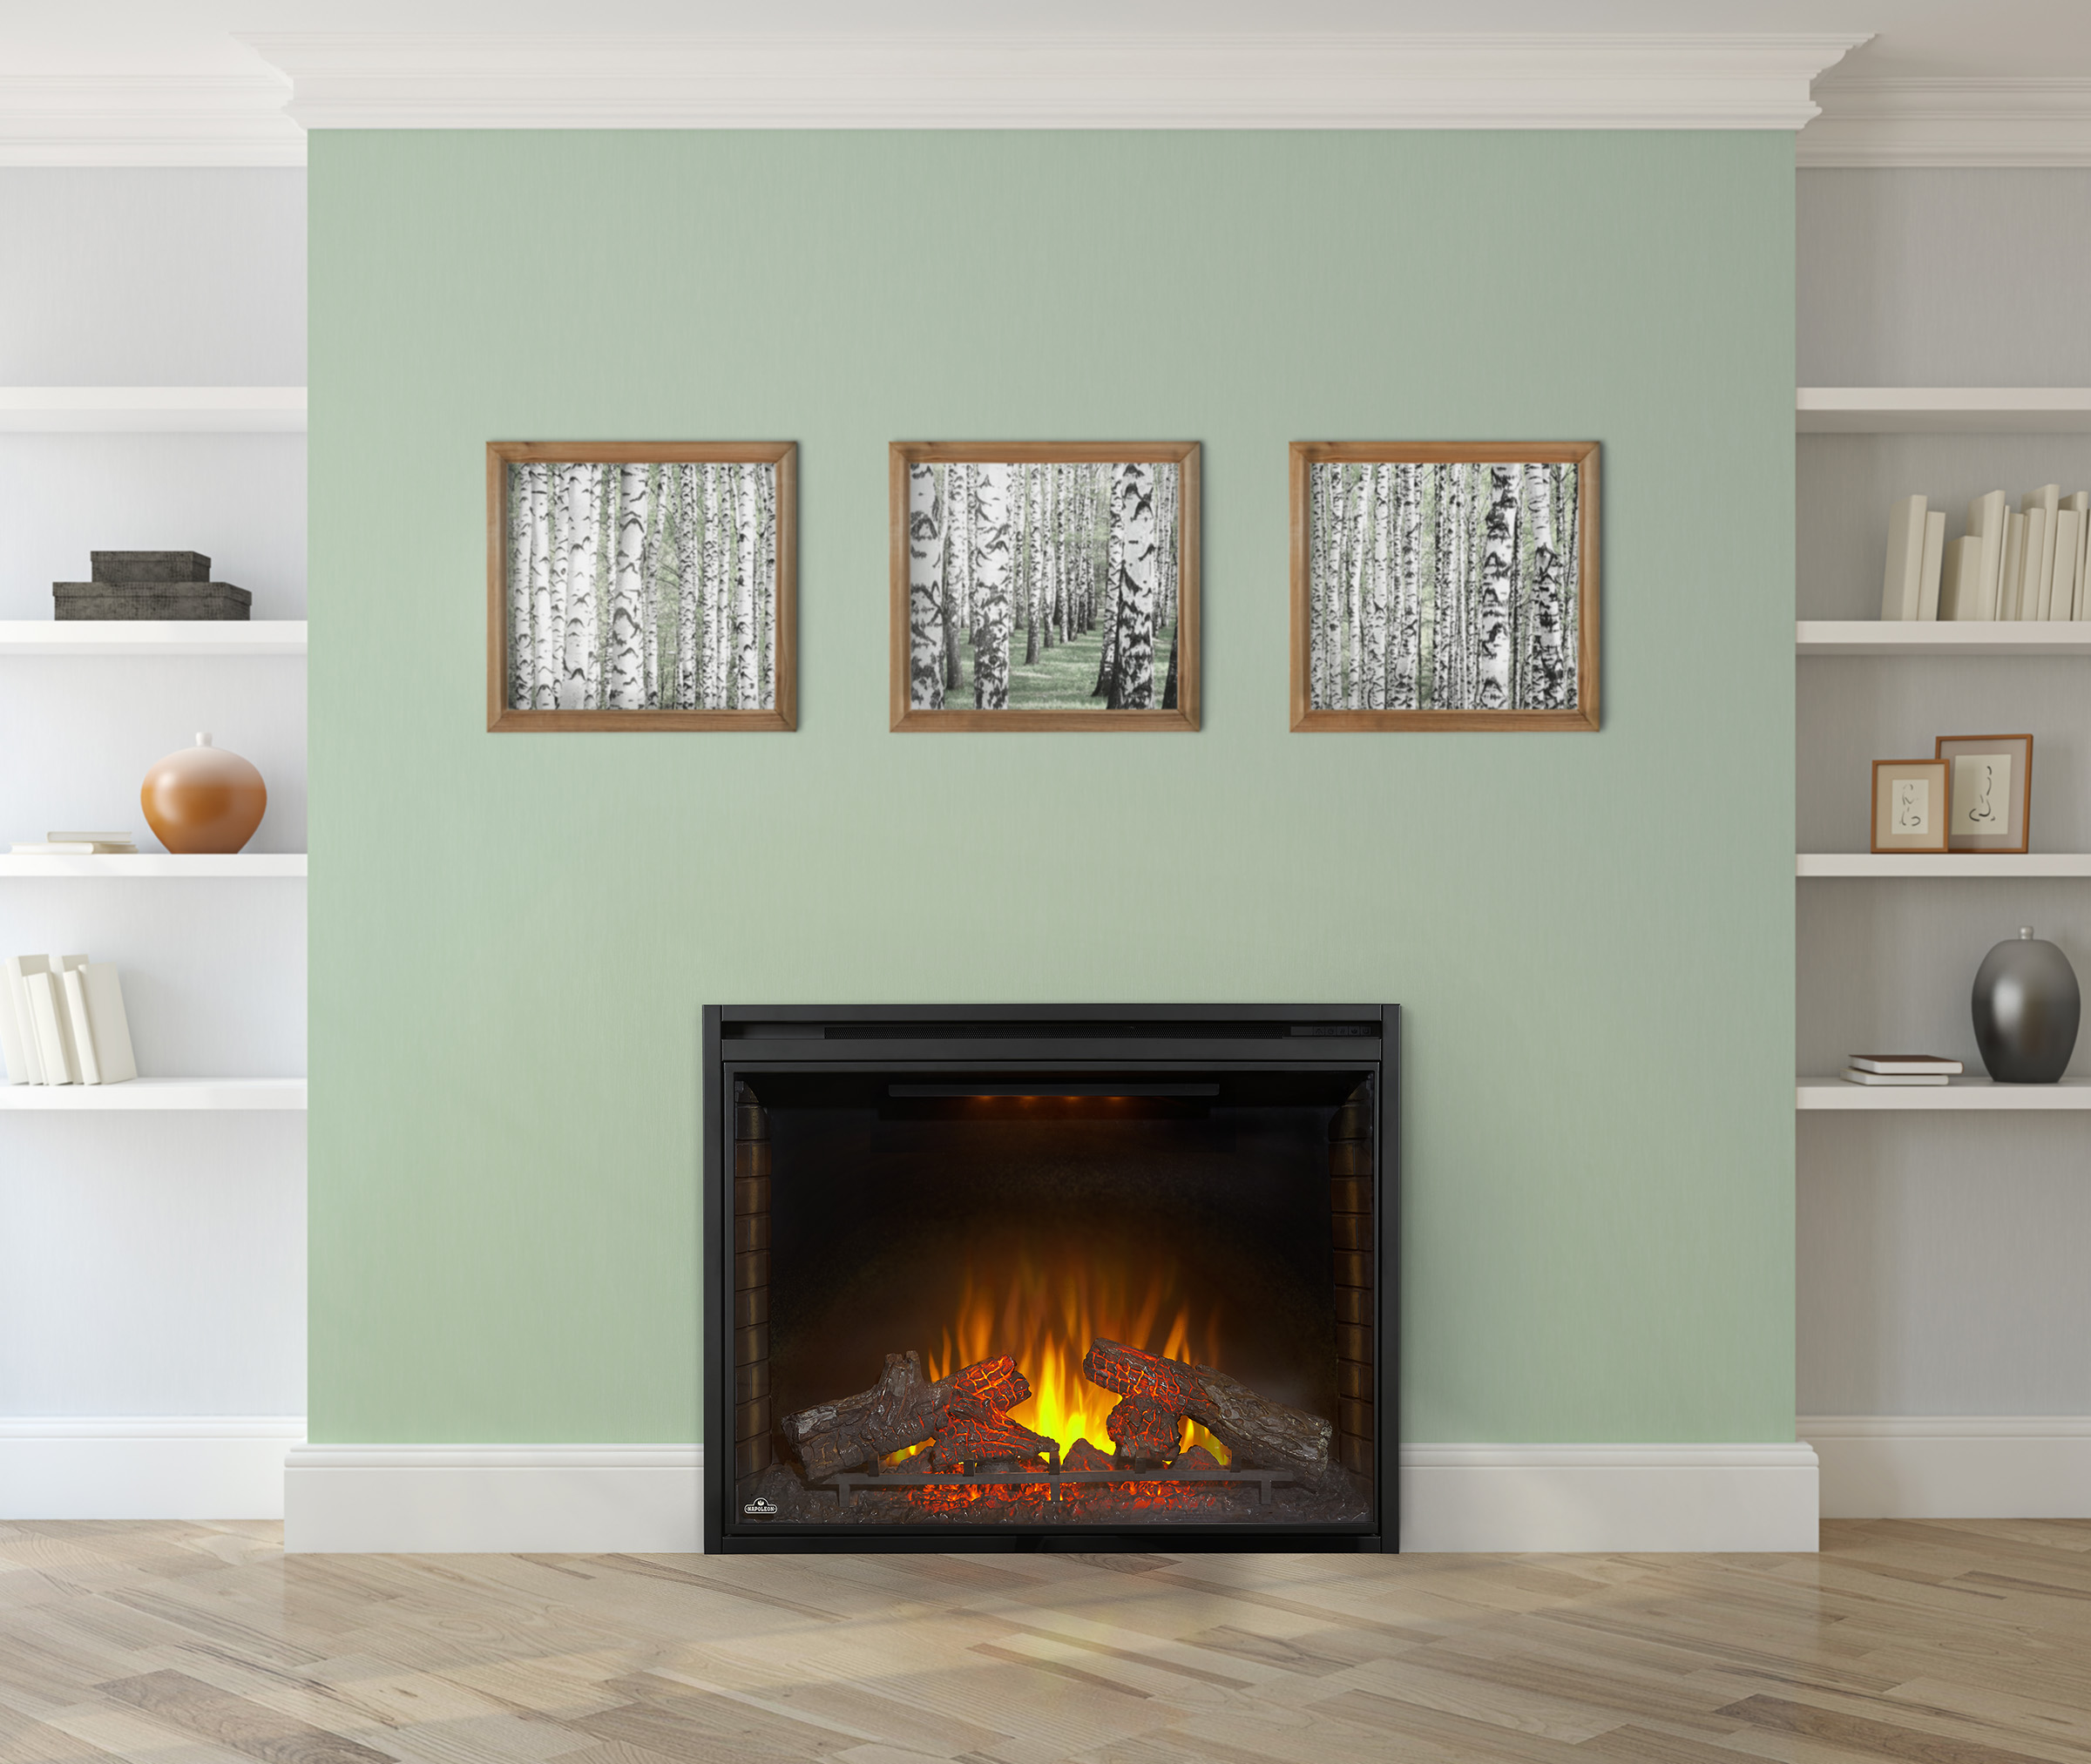 Product Image for Napoleon NEFB40H Ascent 40 Built-in Electric Fireplace Insert 